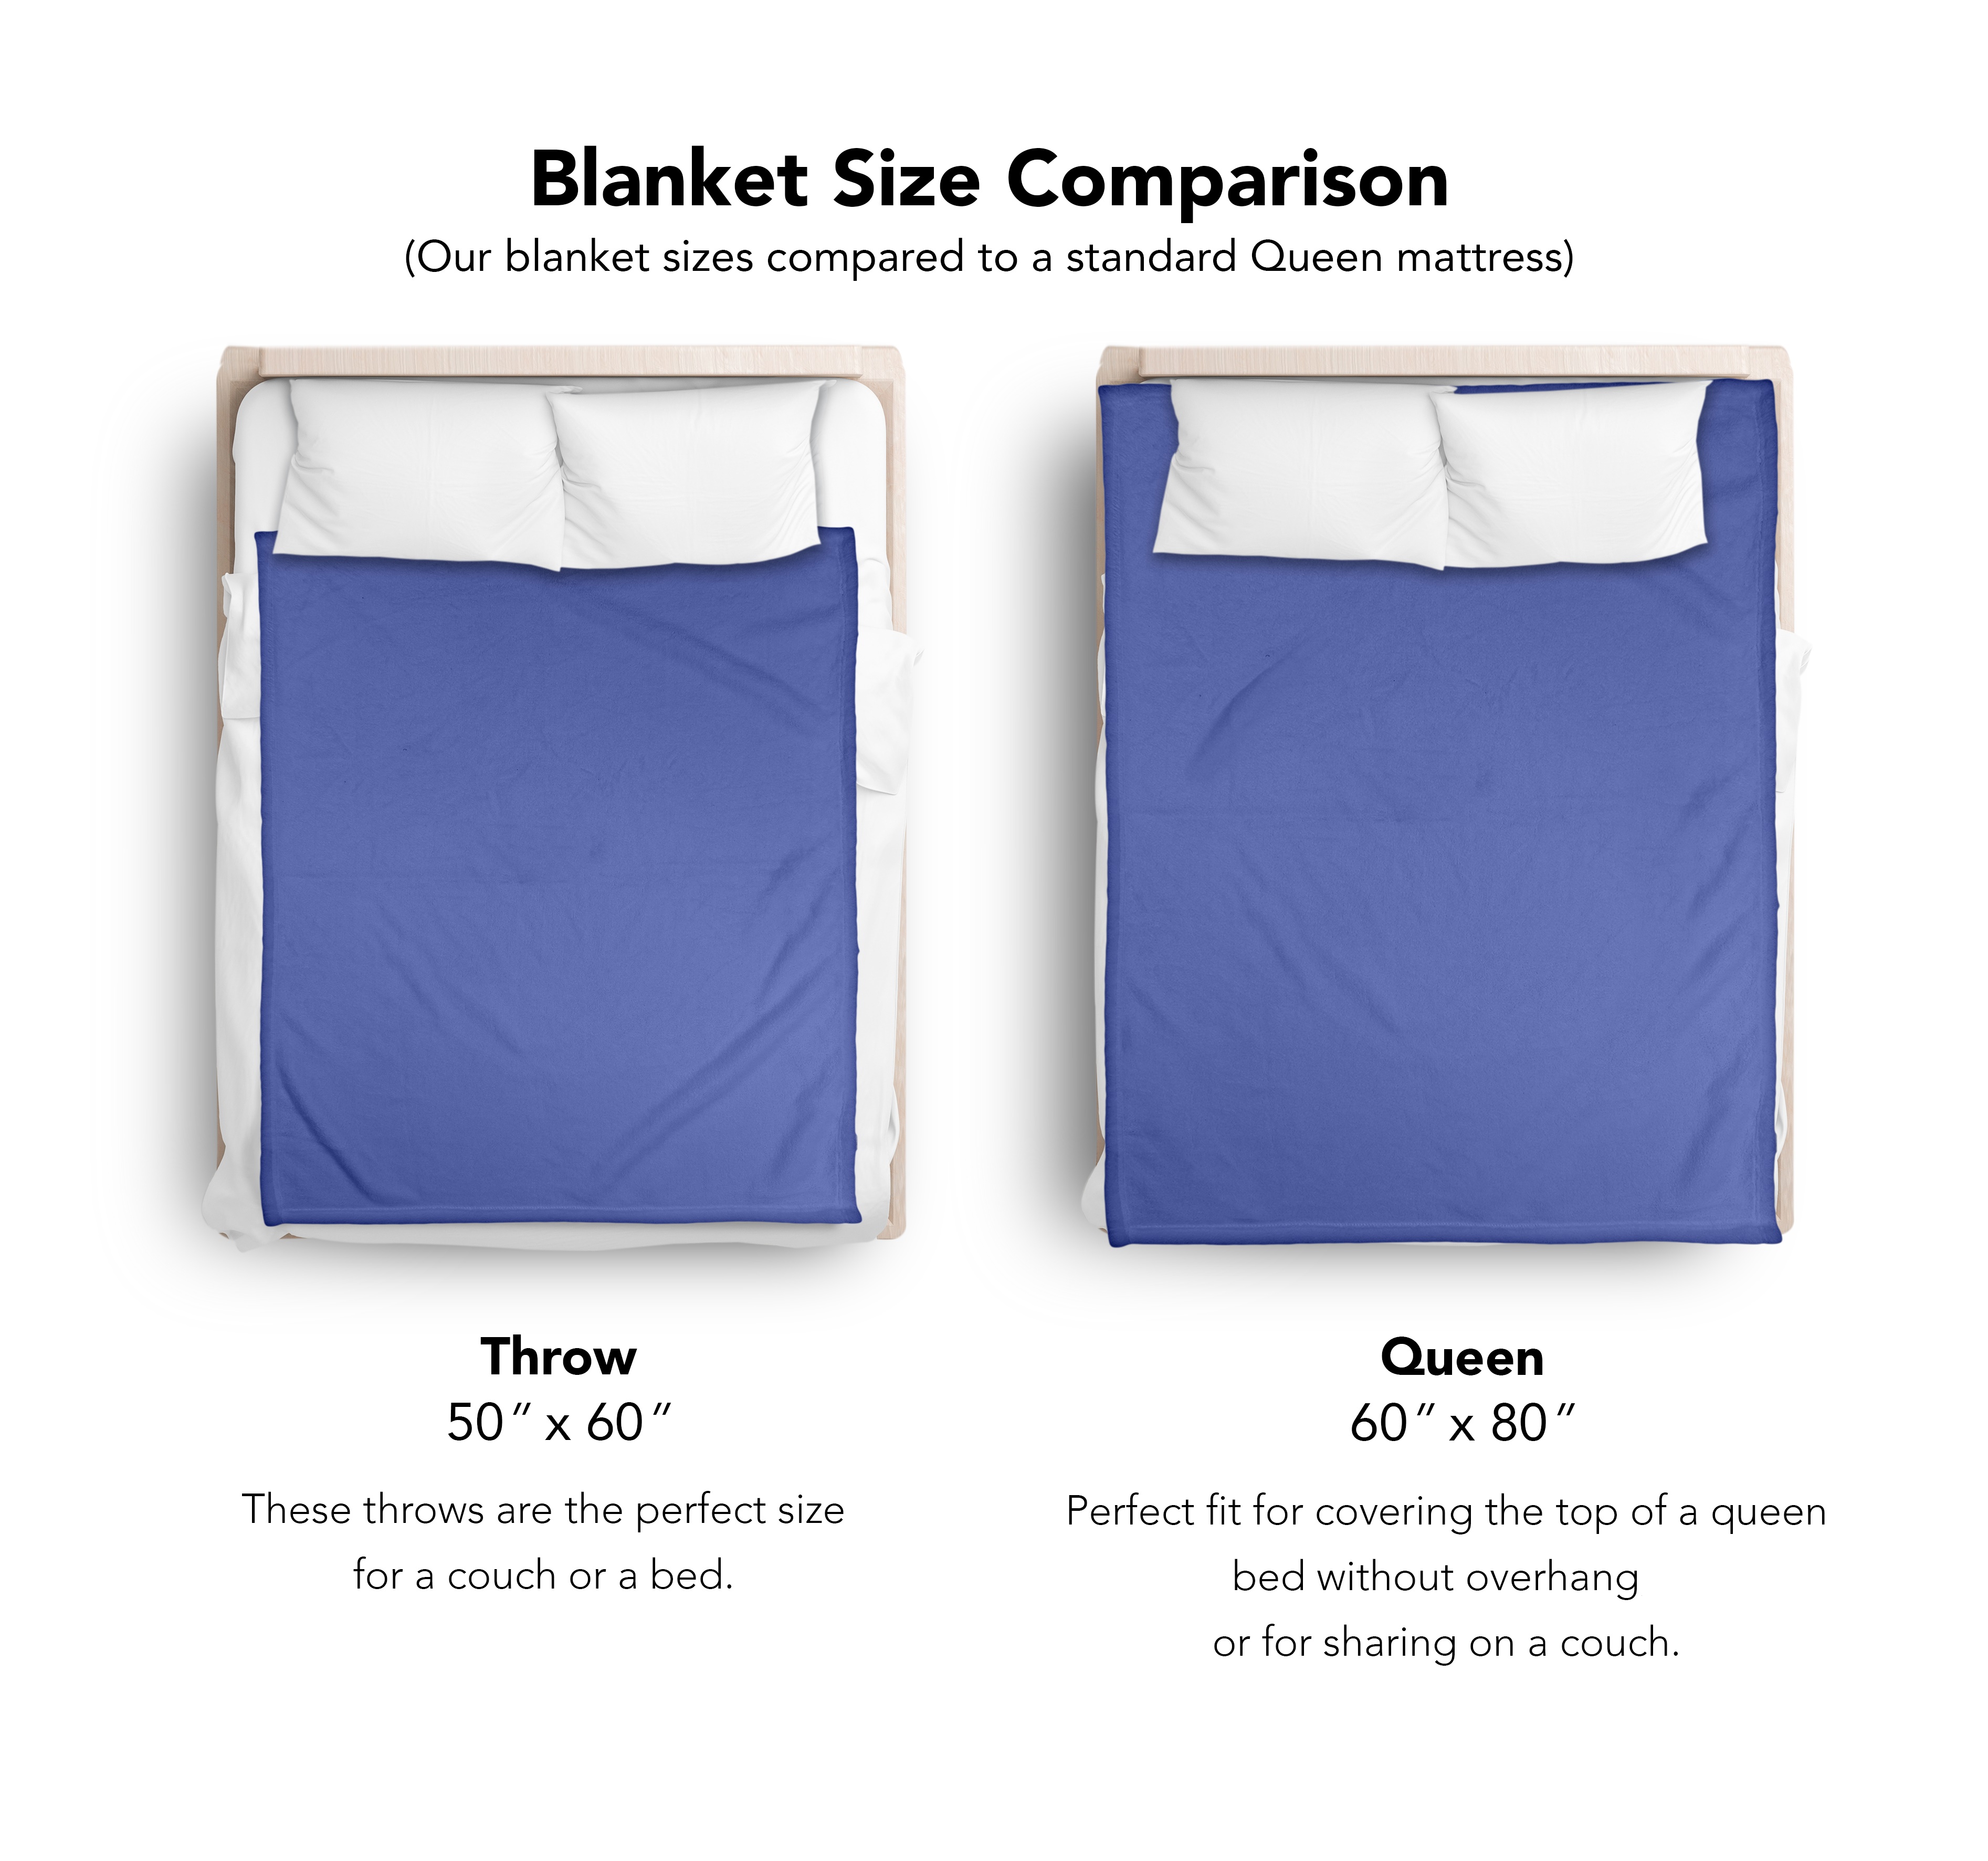 50 By 60 Blanket Size